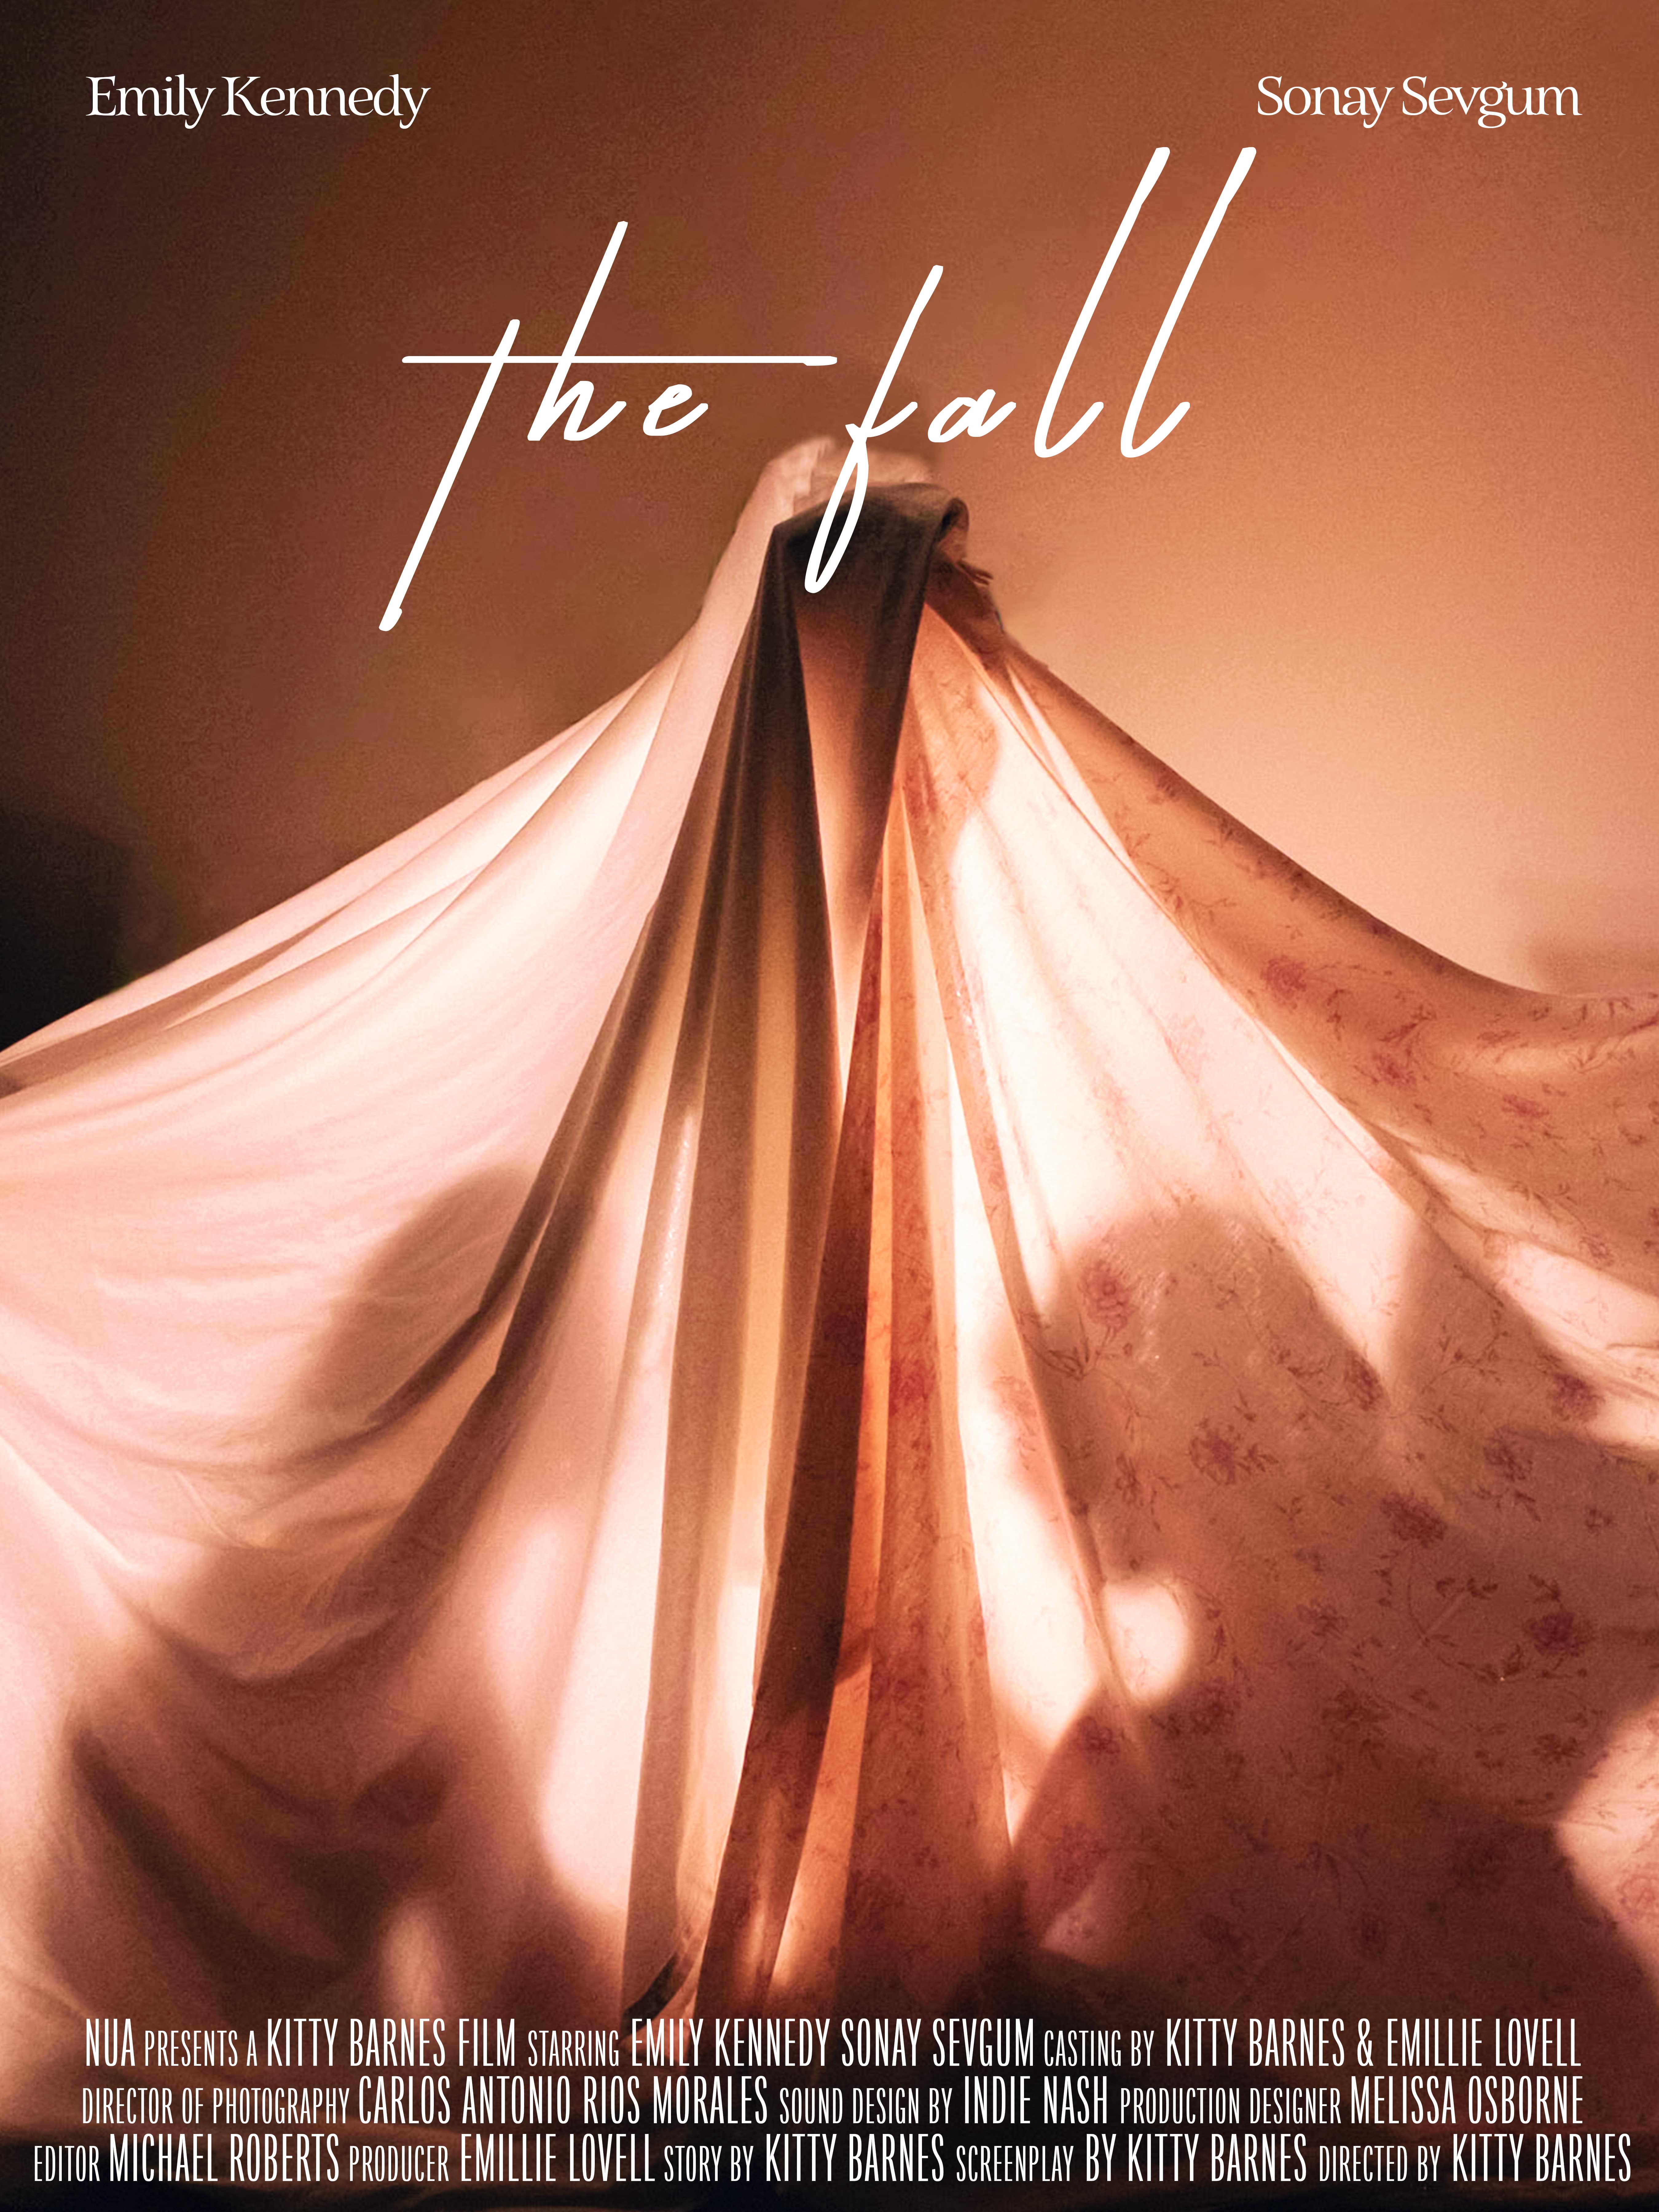 Poster for the film The Fall. It features a photo of two figures underneath a sheet tent with the title and credits.